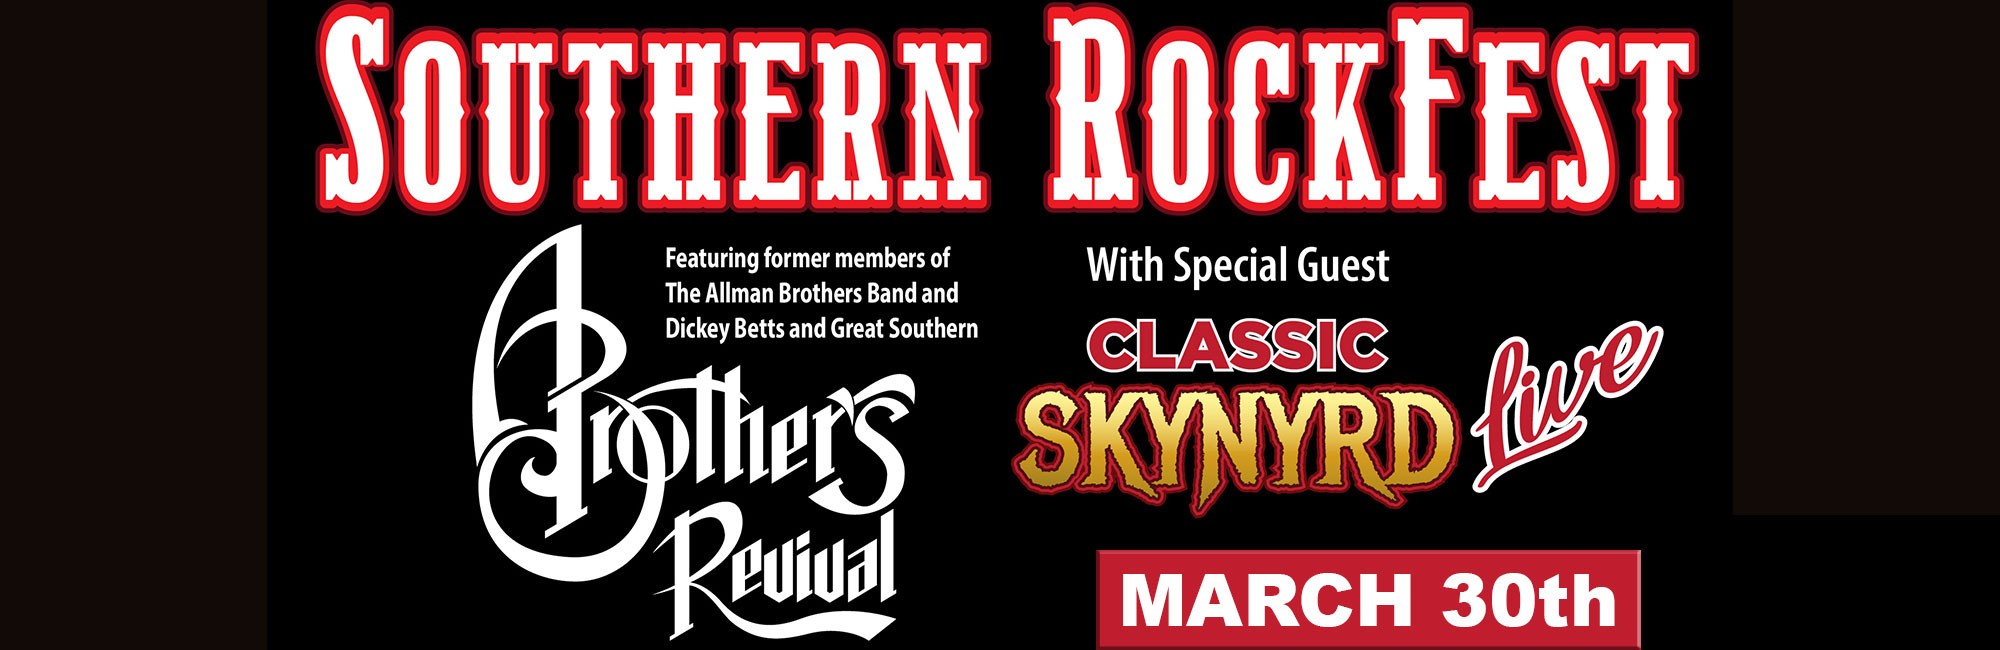 Southern Rockfest featuring A Brother’s Revival and Classic Skynyrd Live